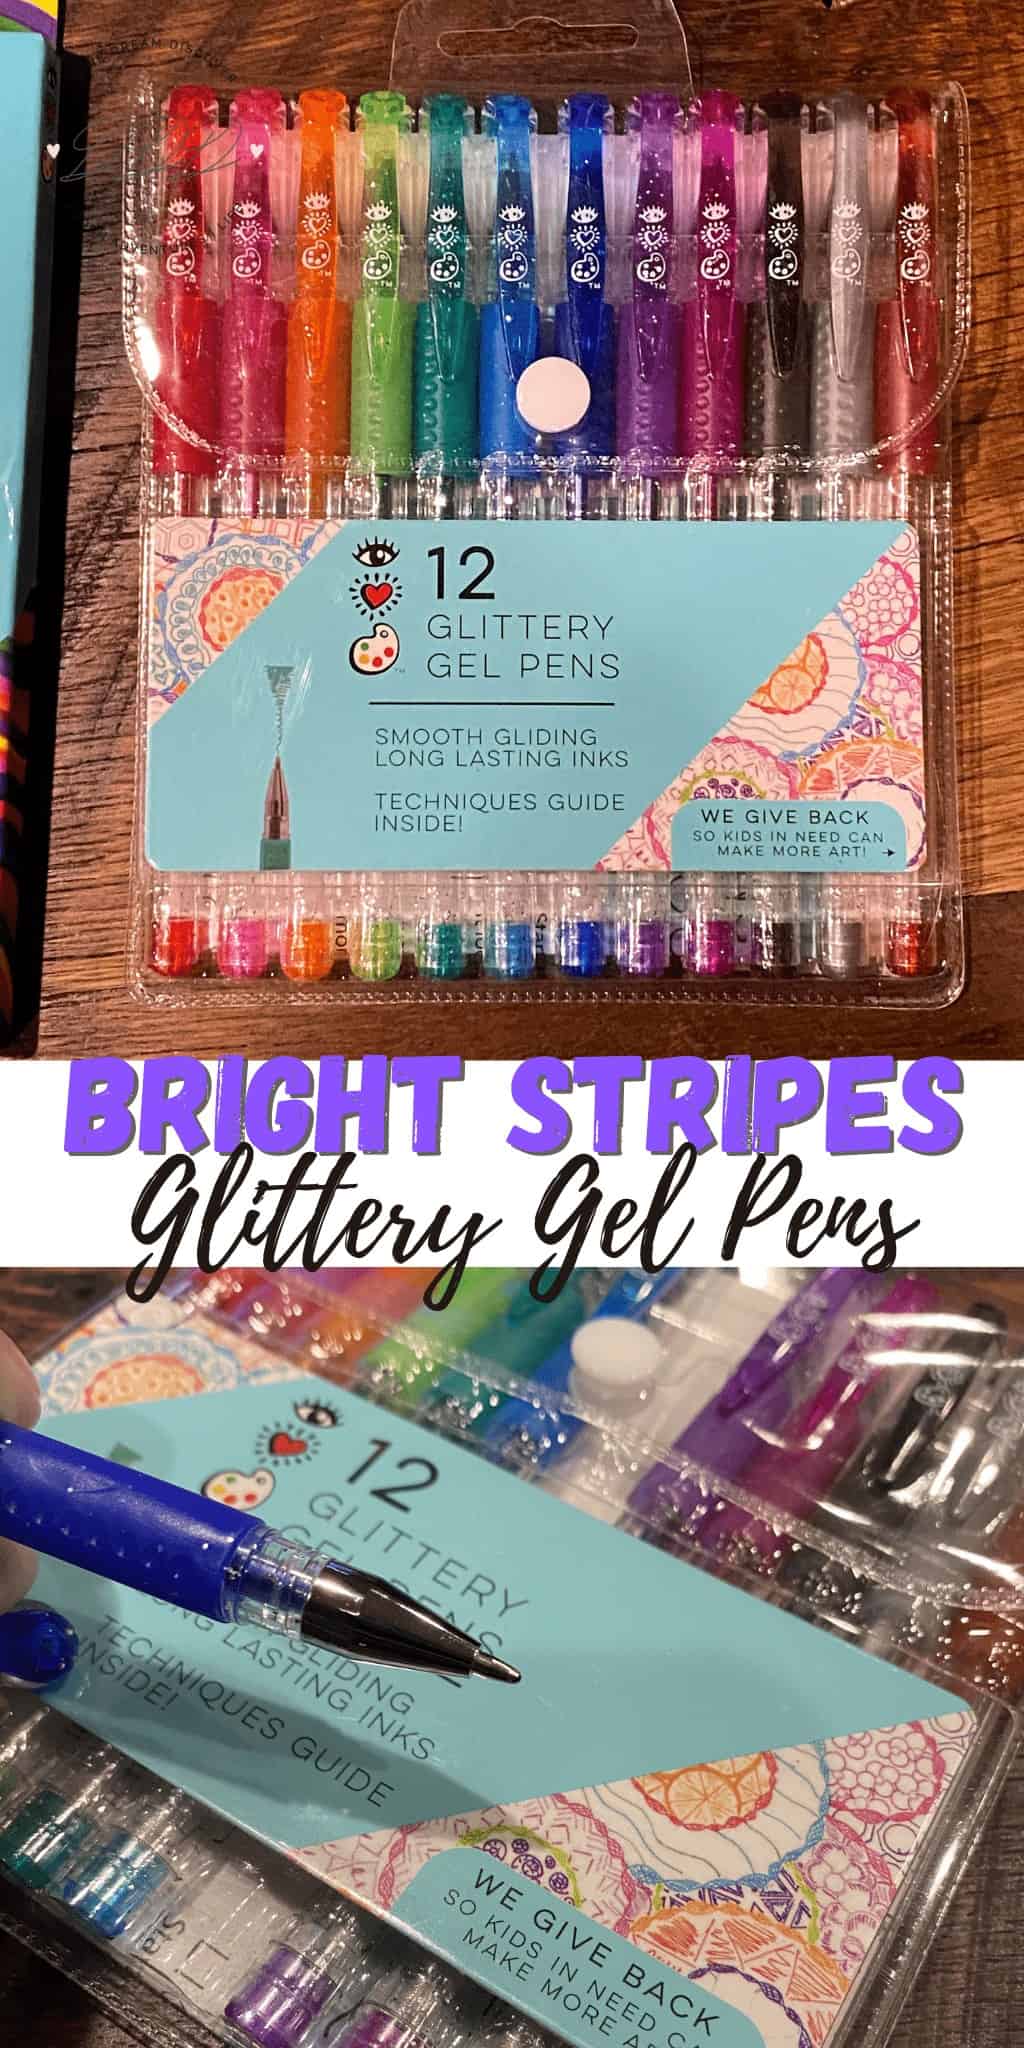 Bring out the Artistic Talent with Glitter Gel Pens